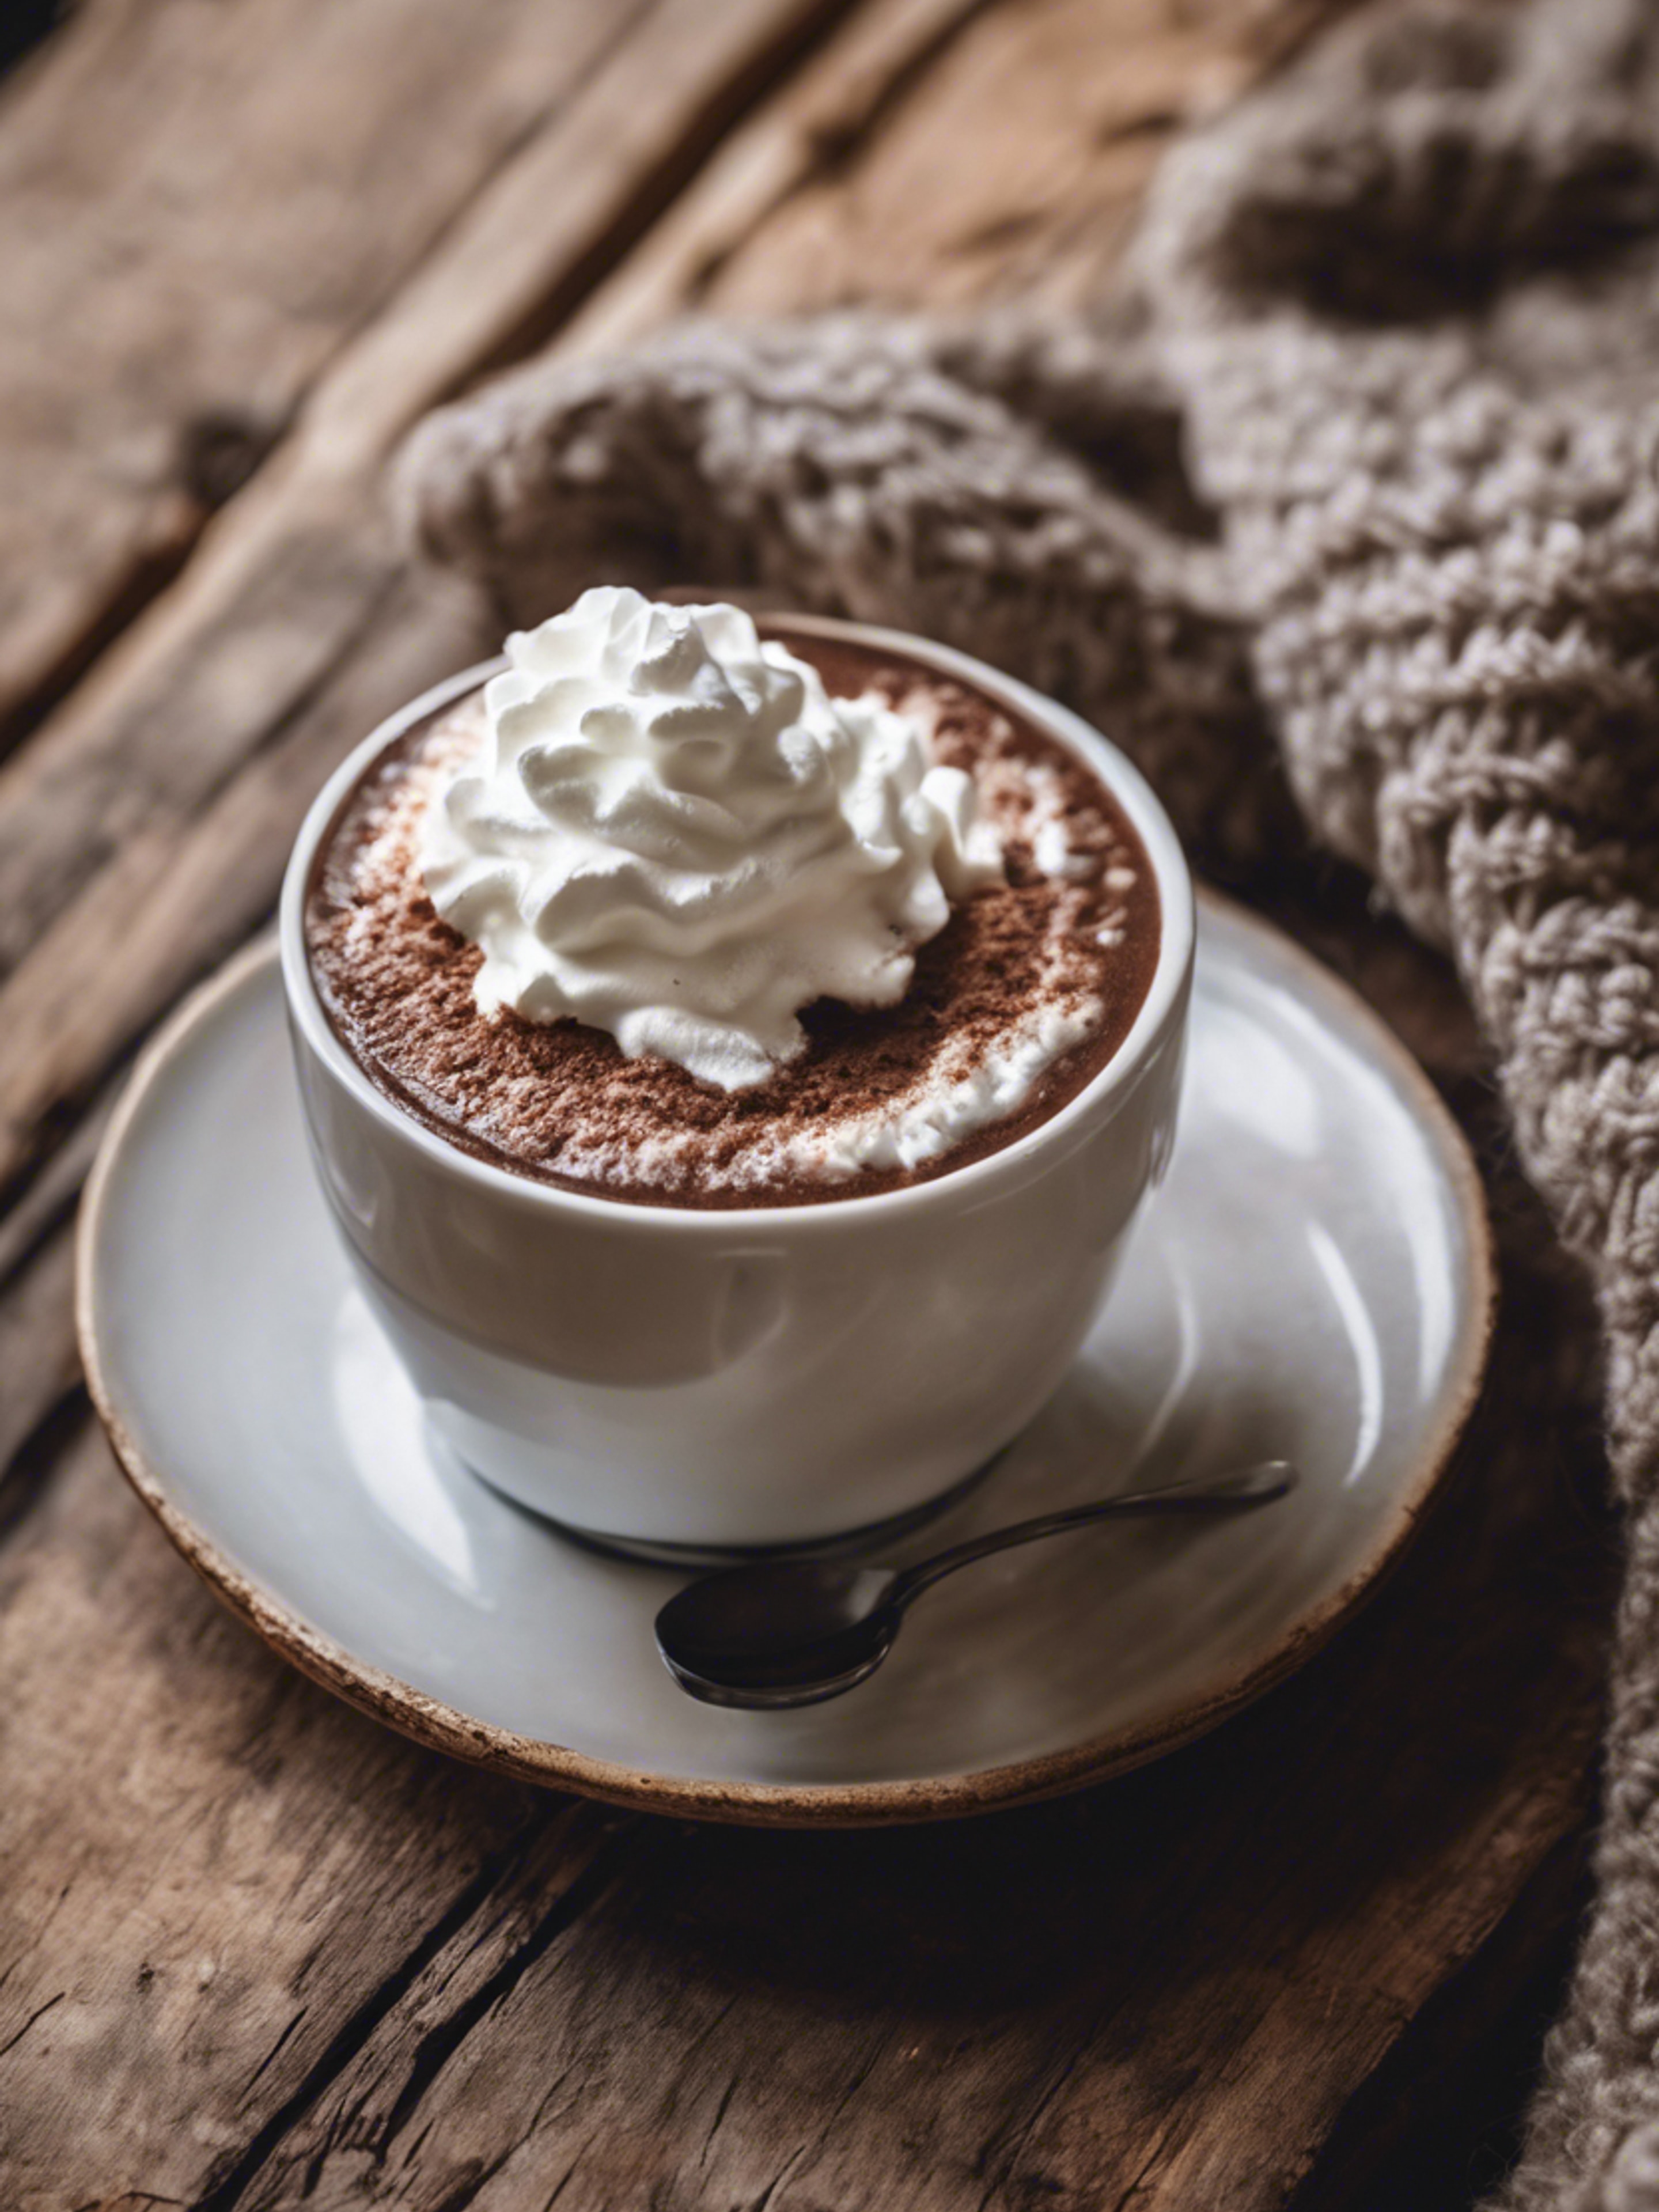 A porcelain cup of steaming hot chocolate topped with whipped cream, next to a crochet coaster on a rough wooden table. Behang[f8ececc79cde48c88690]